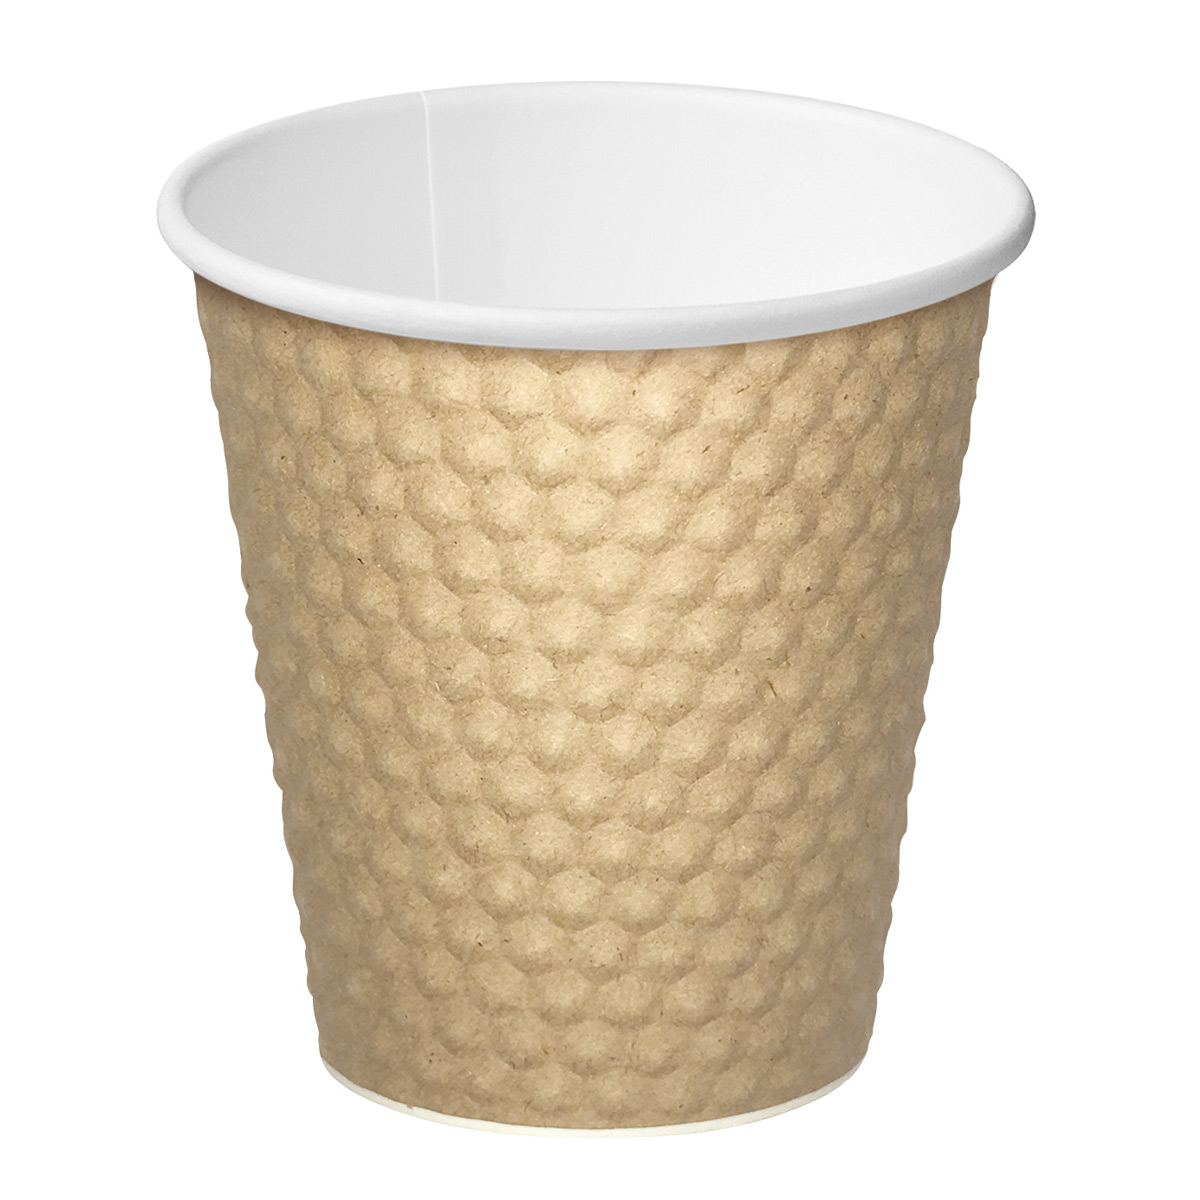 consumables-and-hospitality-packaging-dimple-cup-brown-8oz-280ml-x500-designed-insulating-pockets-air-reduce-heat-transferred-from-contents-fingers-vjs-distributors-hawkes-bay-nz-CA-DMPL8-BRN